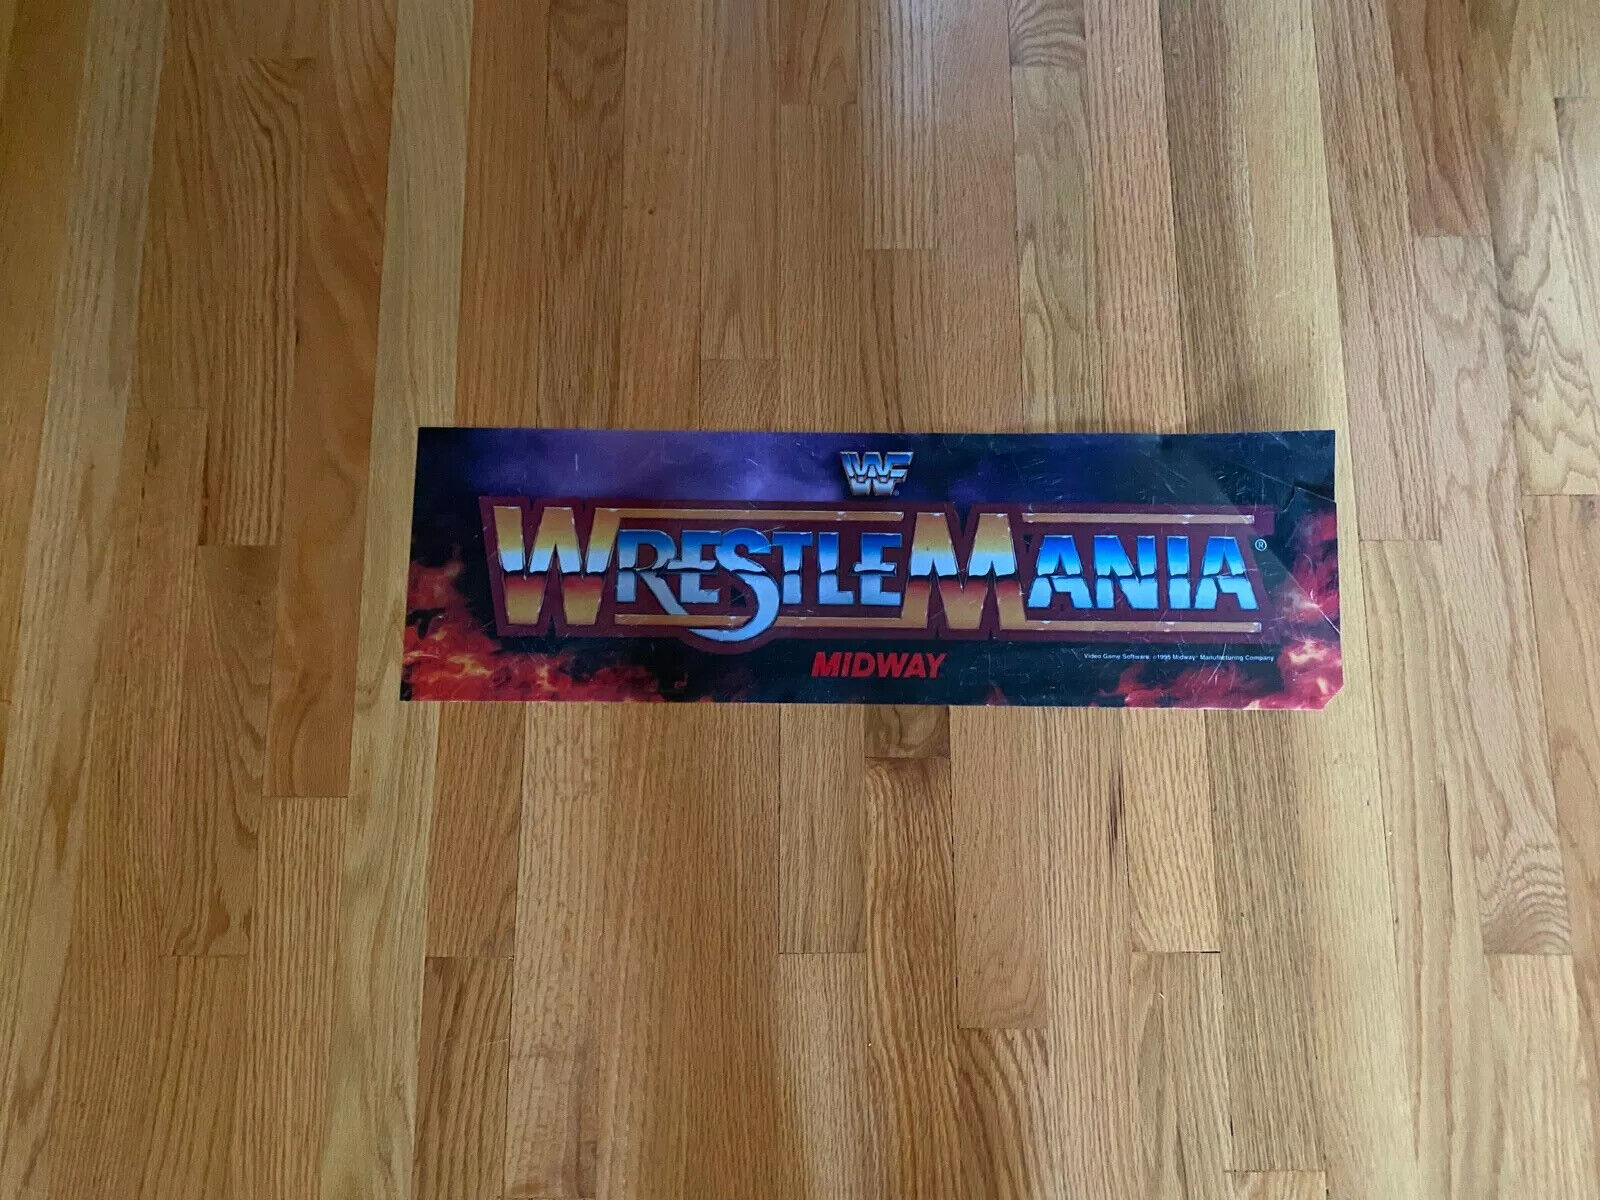 Wwf Wrestle Mania Video Arcade Game Translight Marquee, Midway 1995